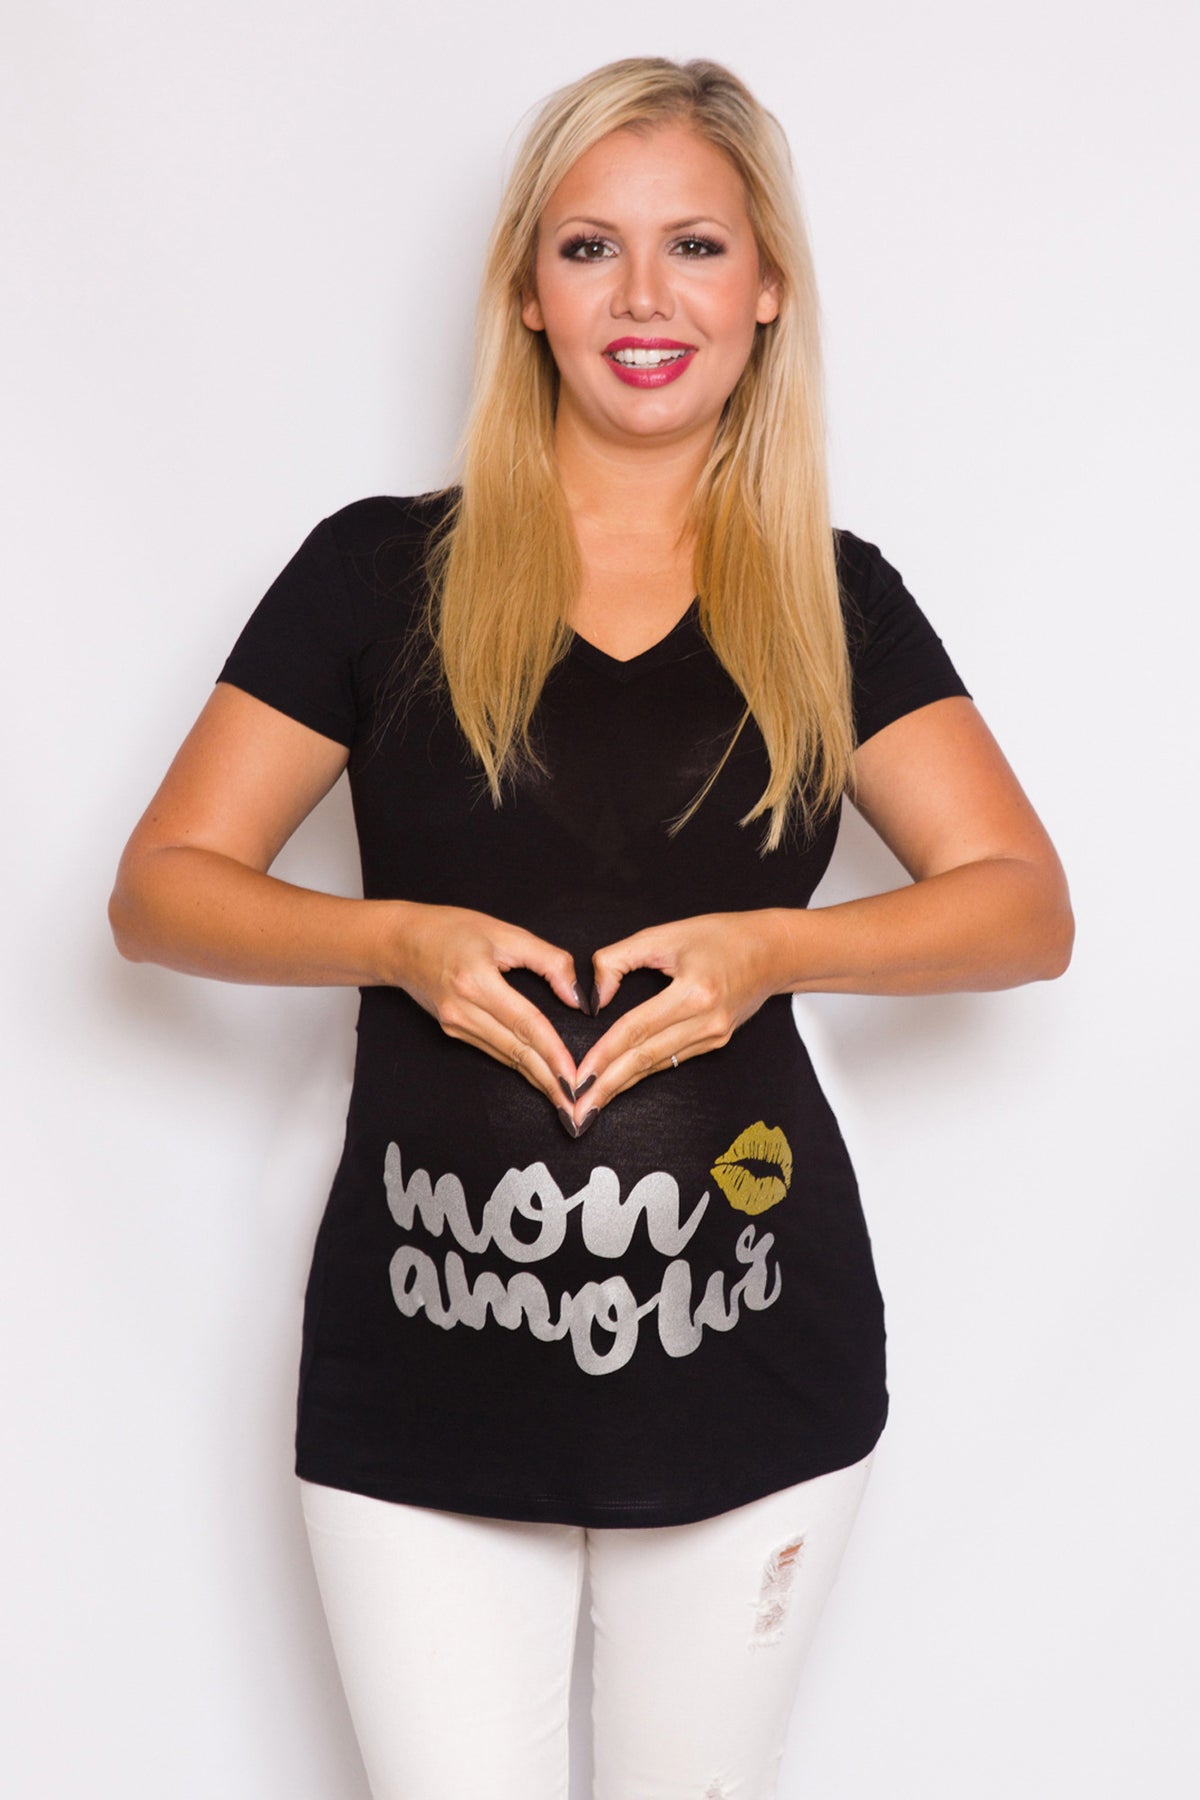 "Mon Amour" Maternity Top - Mommylicious